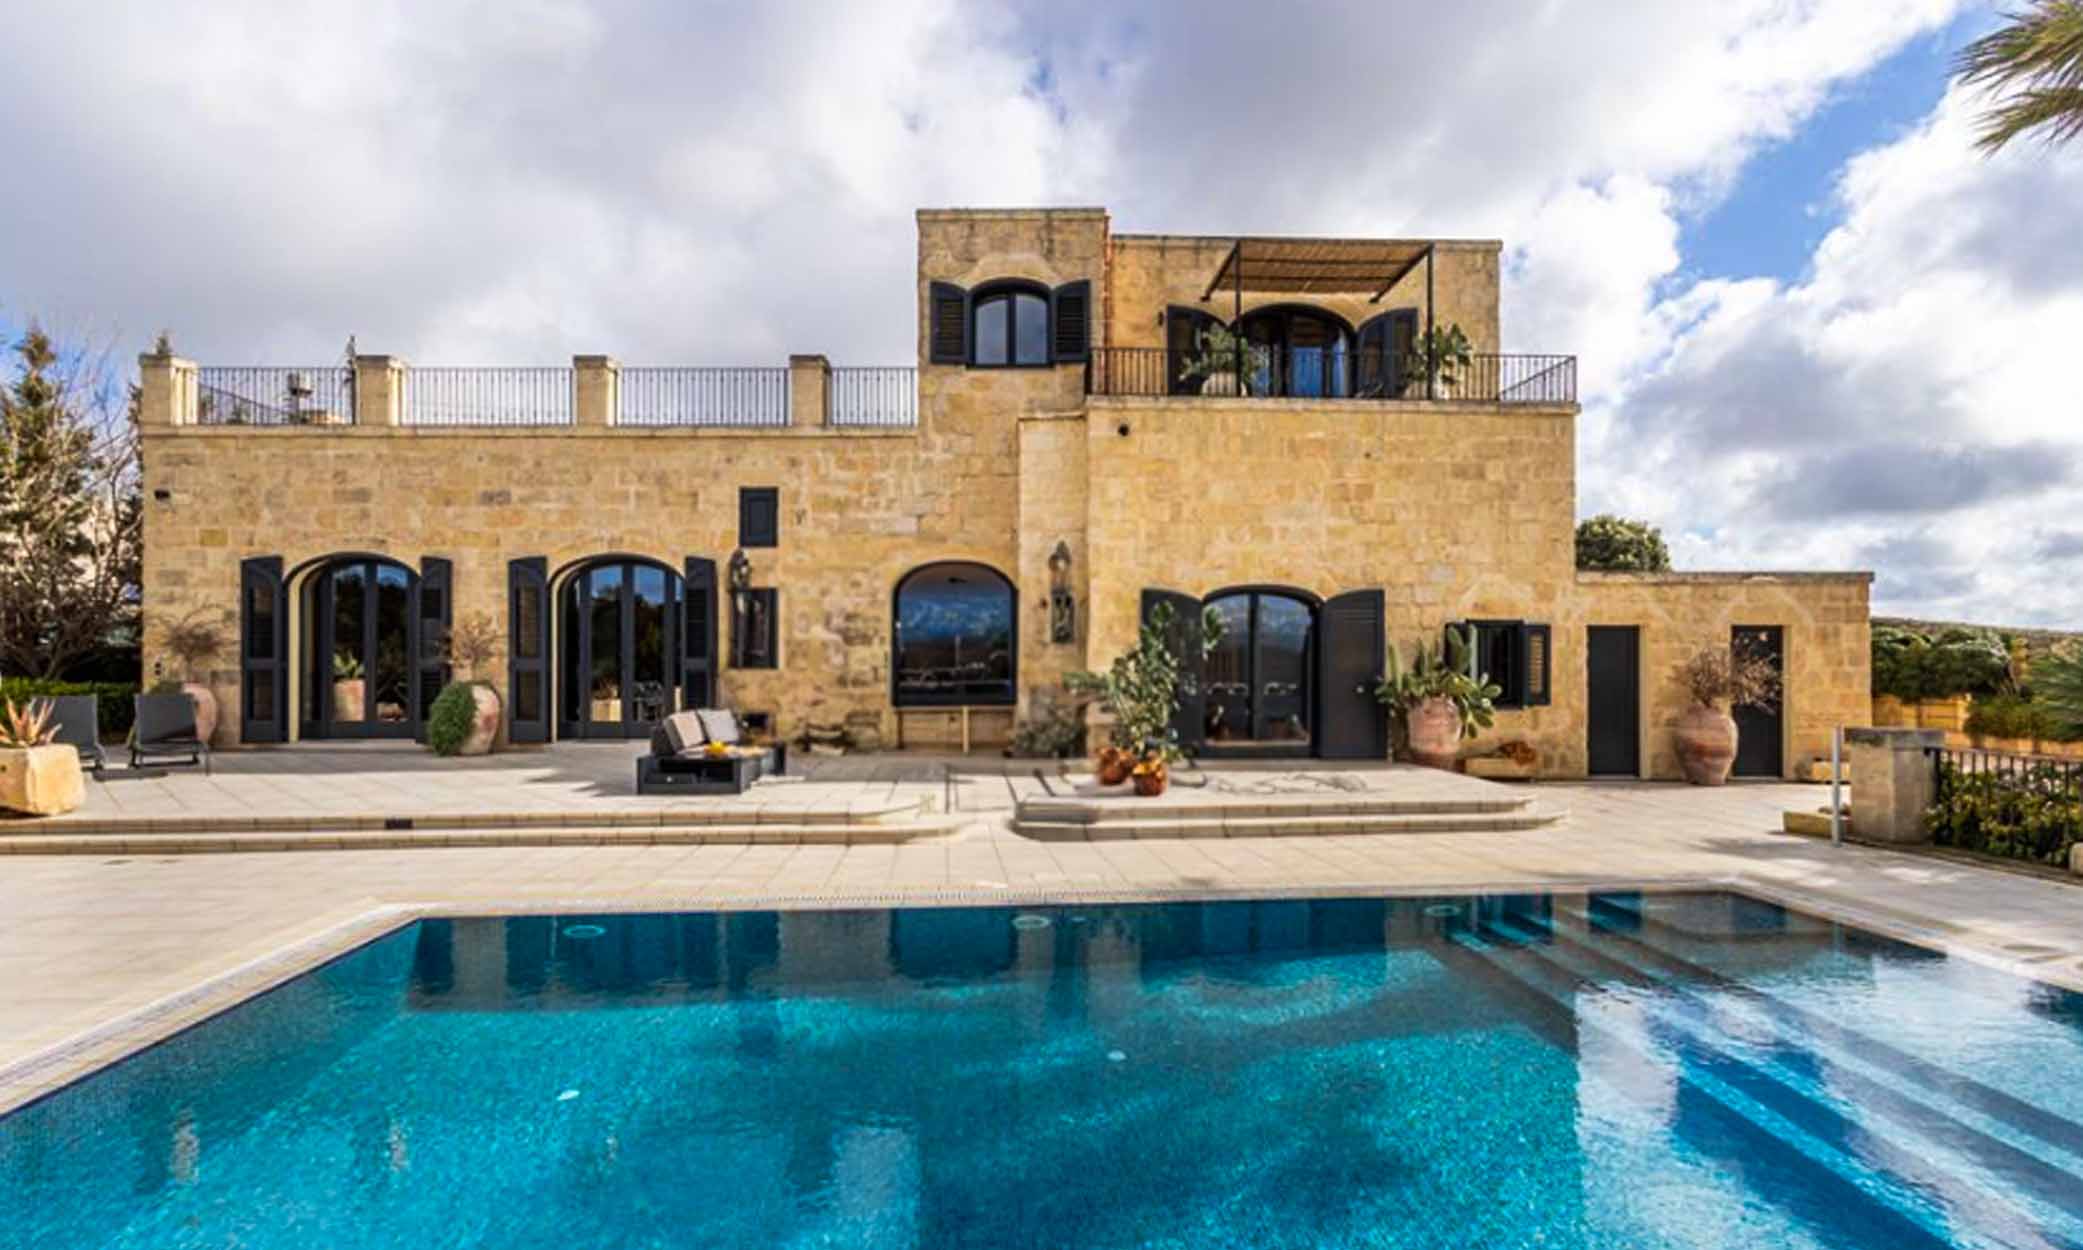 Malta is the only European country to offer citizenship via real estate.